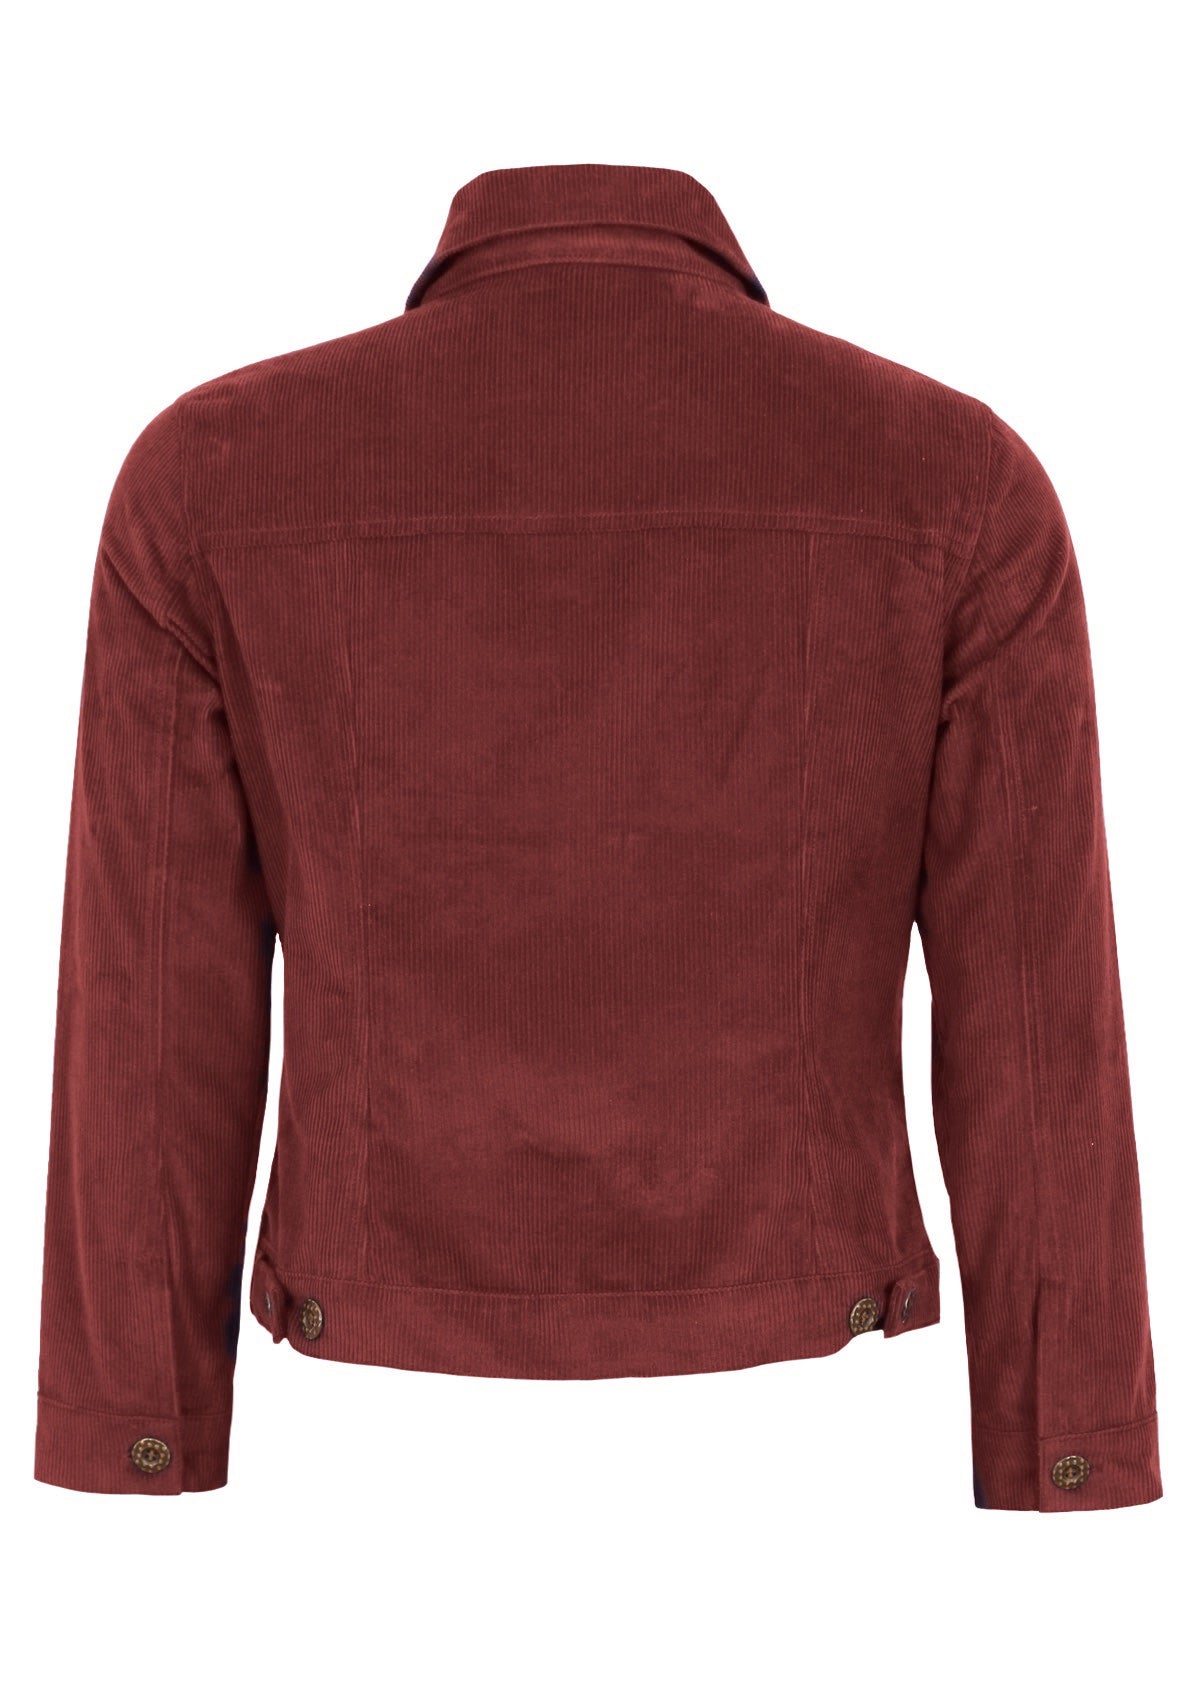 100% cotton corduroy jacket in zinfandel red has adjustable tabs for a perfect fit. 